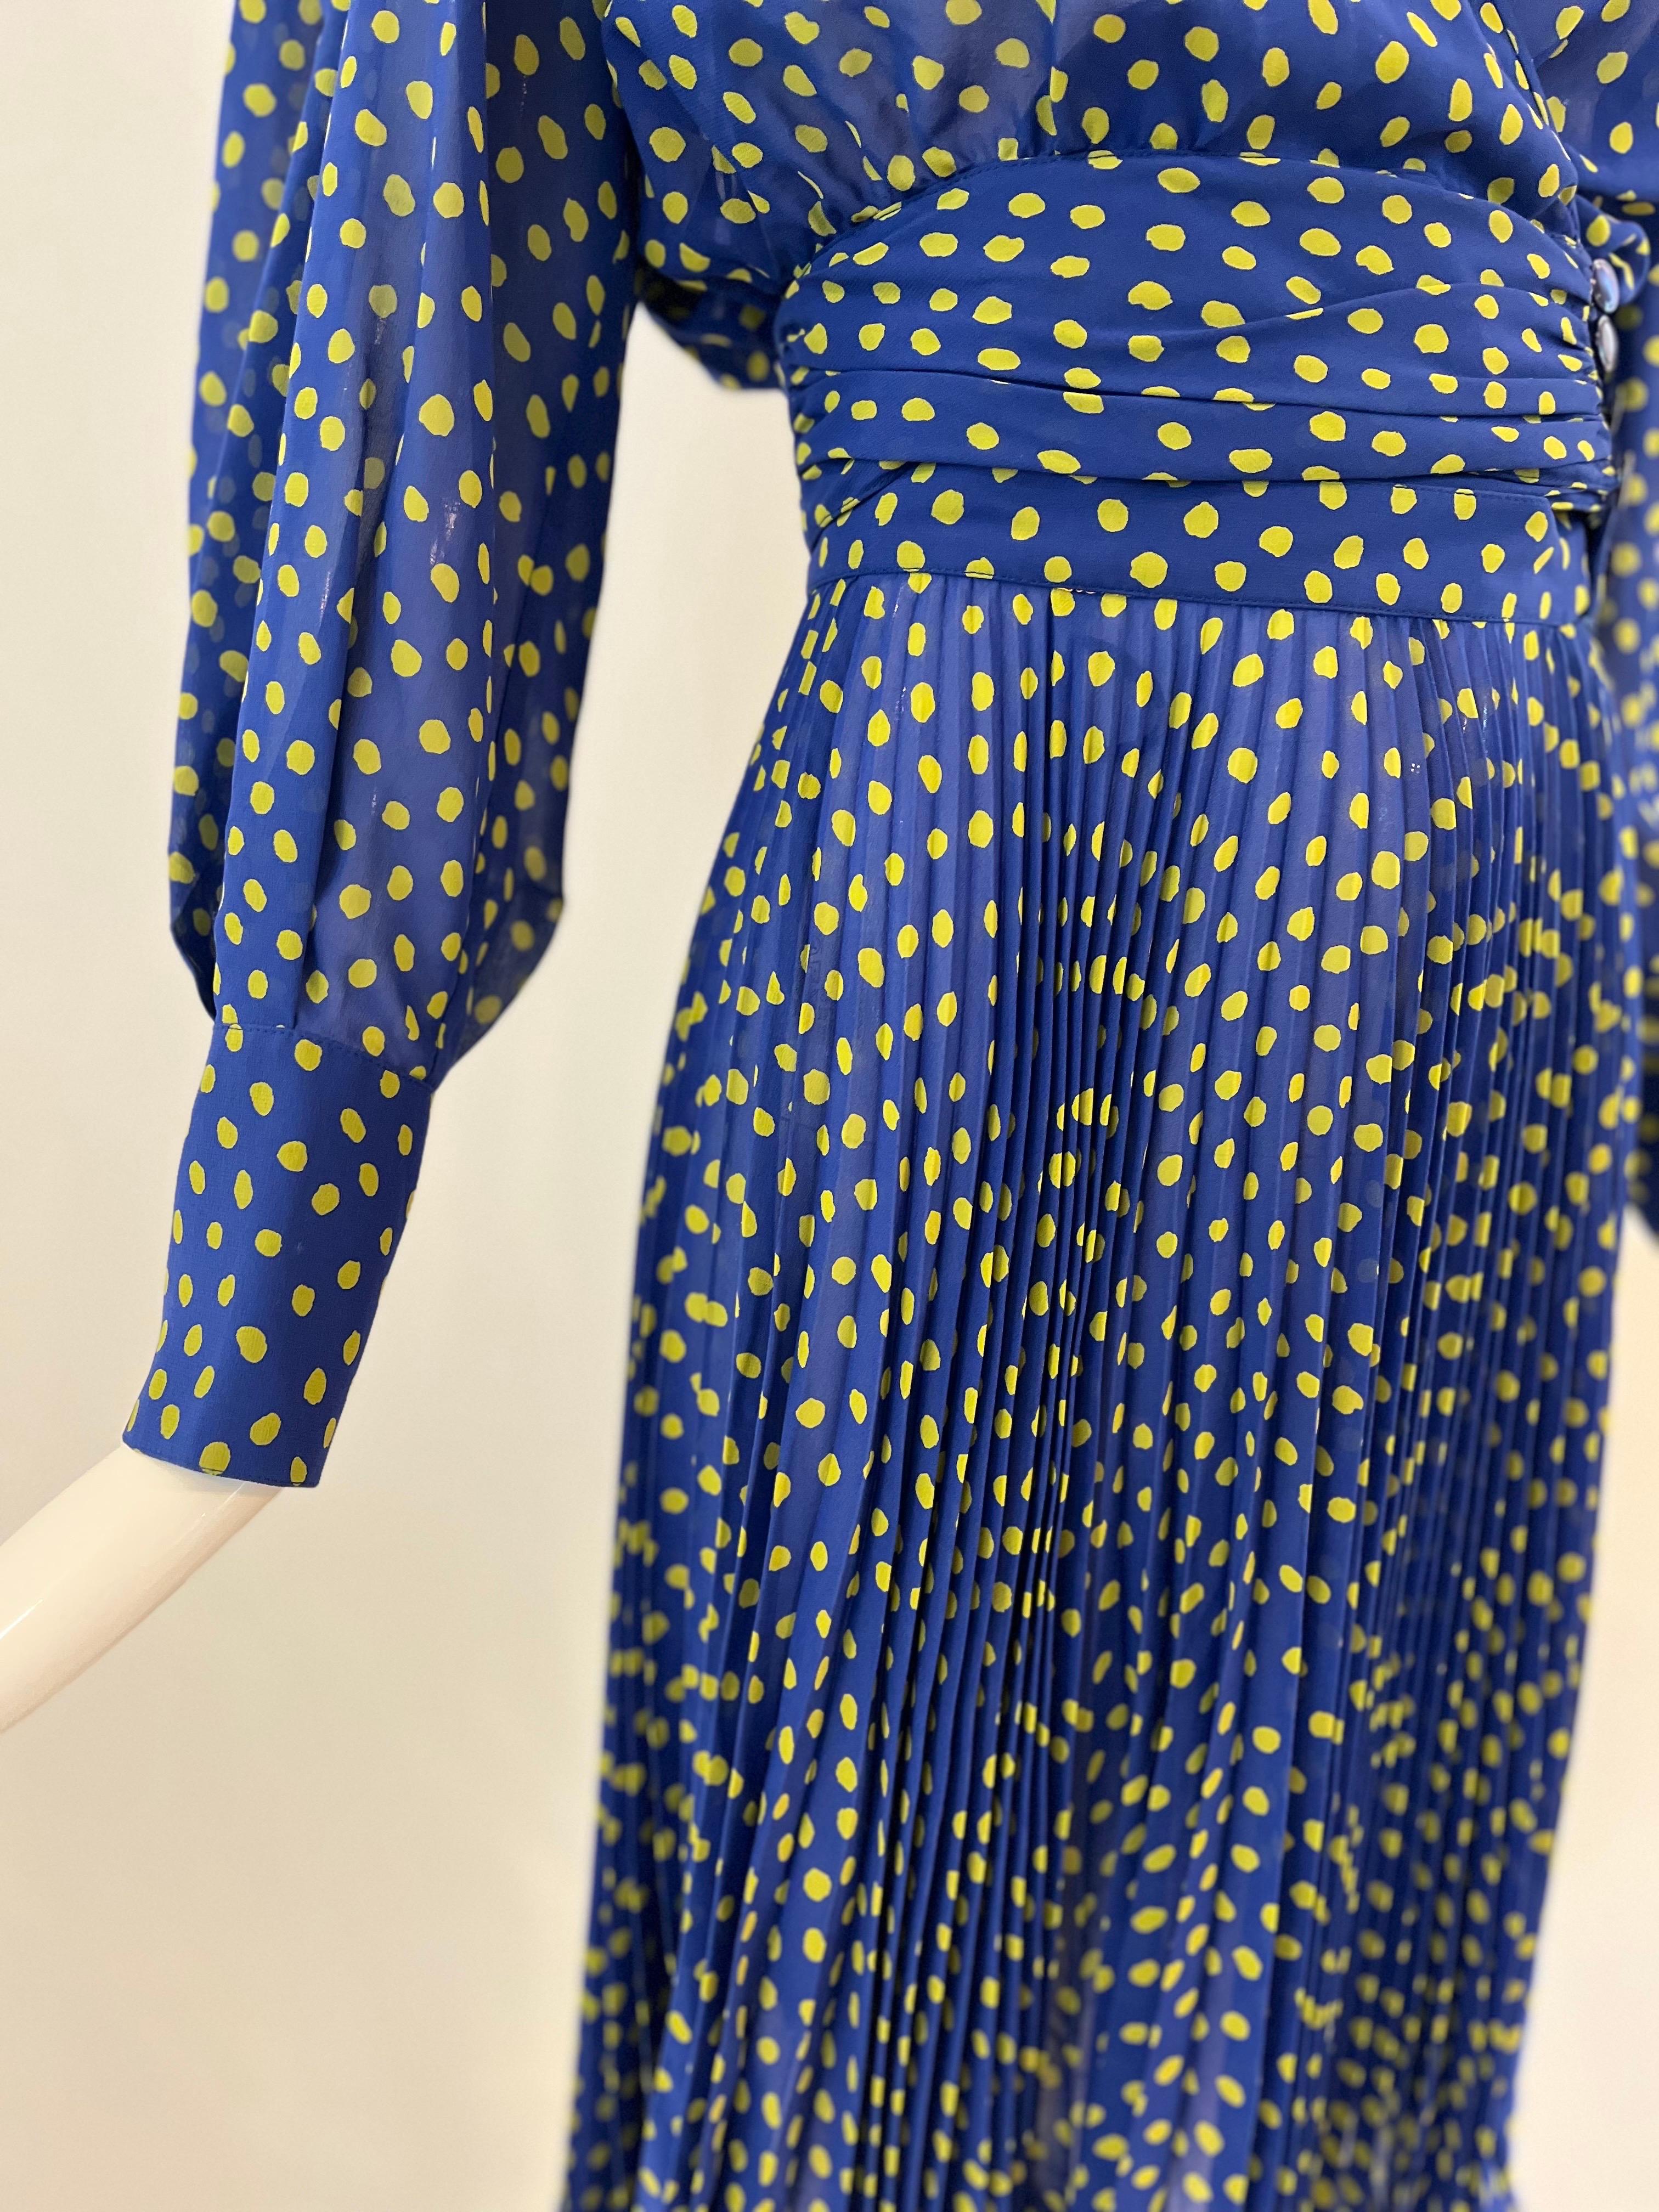 1990s Ungaro flirty little two piece polka dot set in an electric blue with yellow dots.  A full pleated skirt is matched with a wrap top, ruched at the waist with four resin button closure and balloon sleeves with long button cuffs.  The beauty of